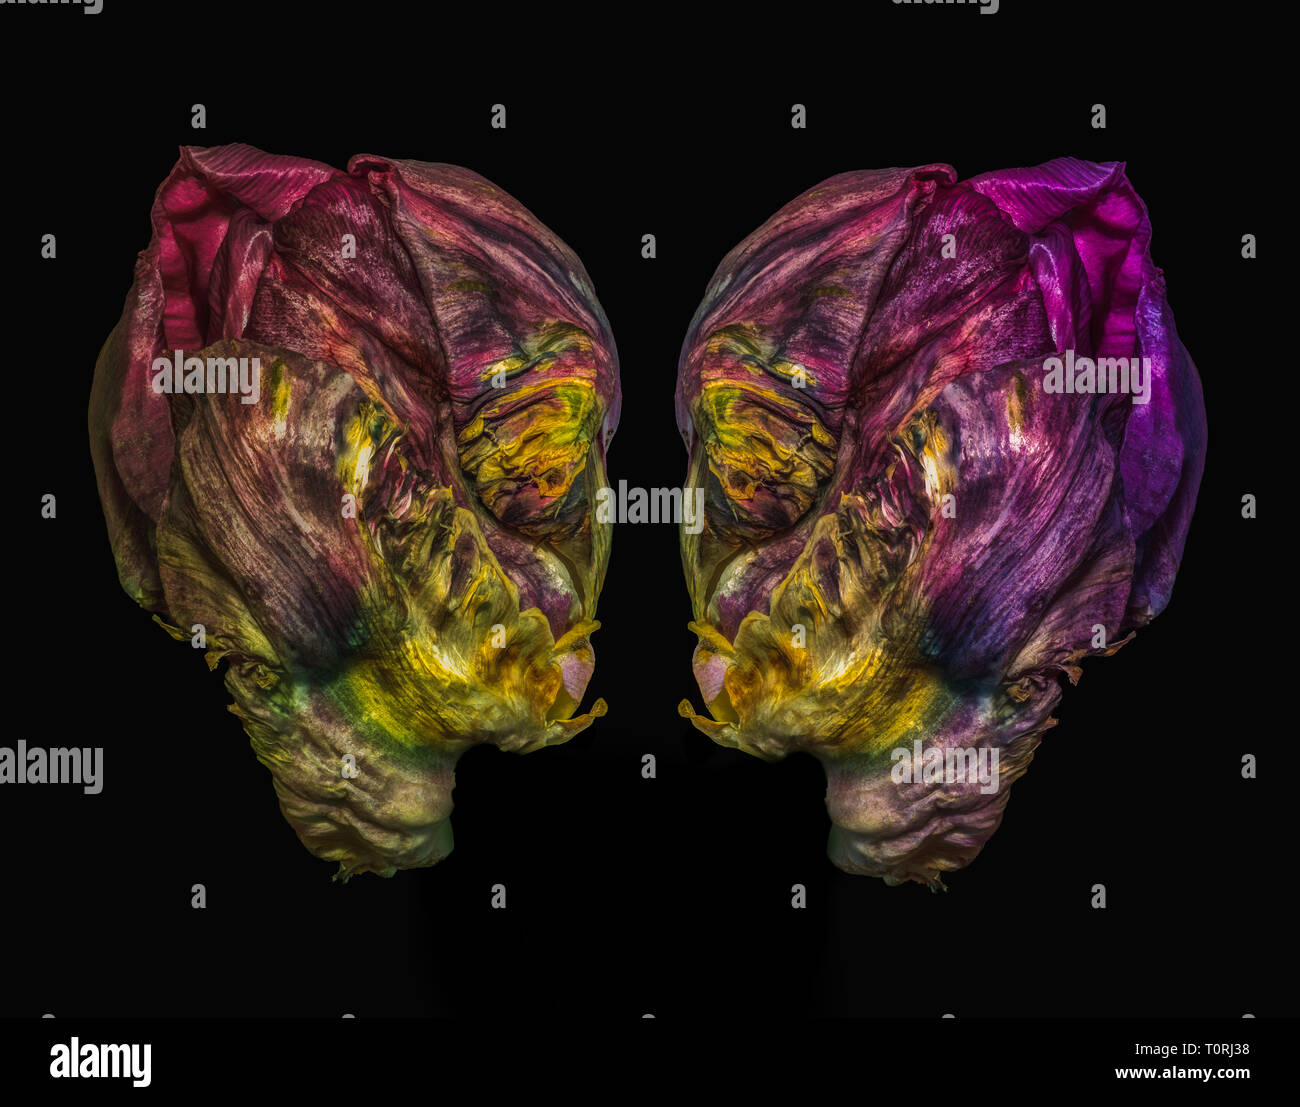 Fine art still life colorful macro of a pair of tulip blossoms resembling heads of aliens talking seriously in surrealistic painting style on black Stock Photo